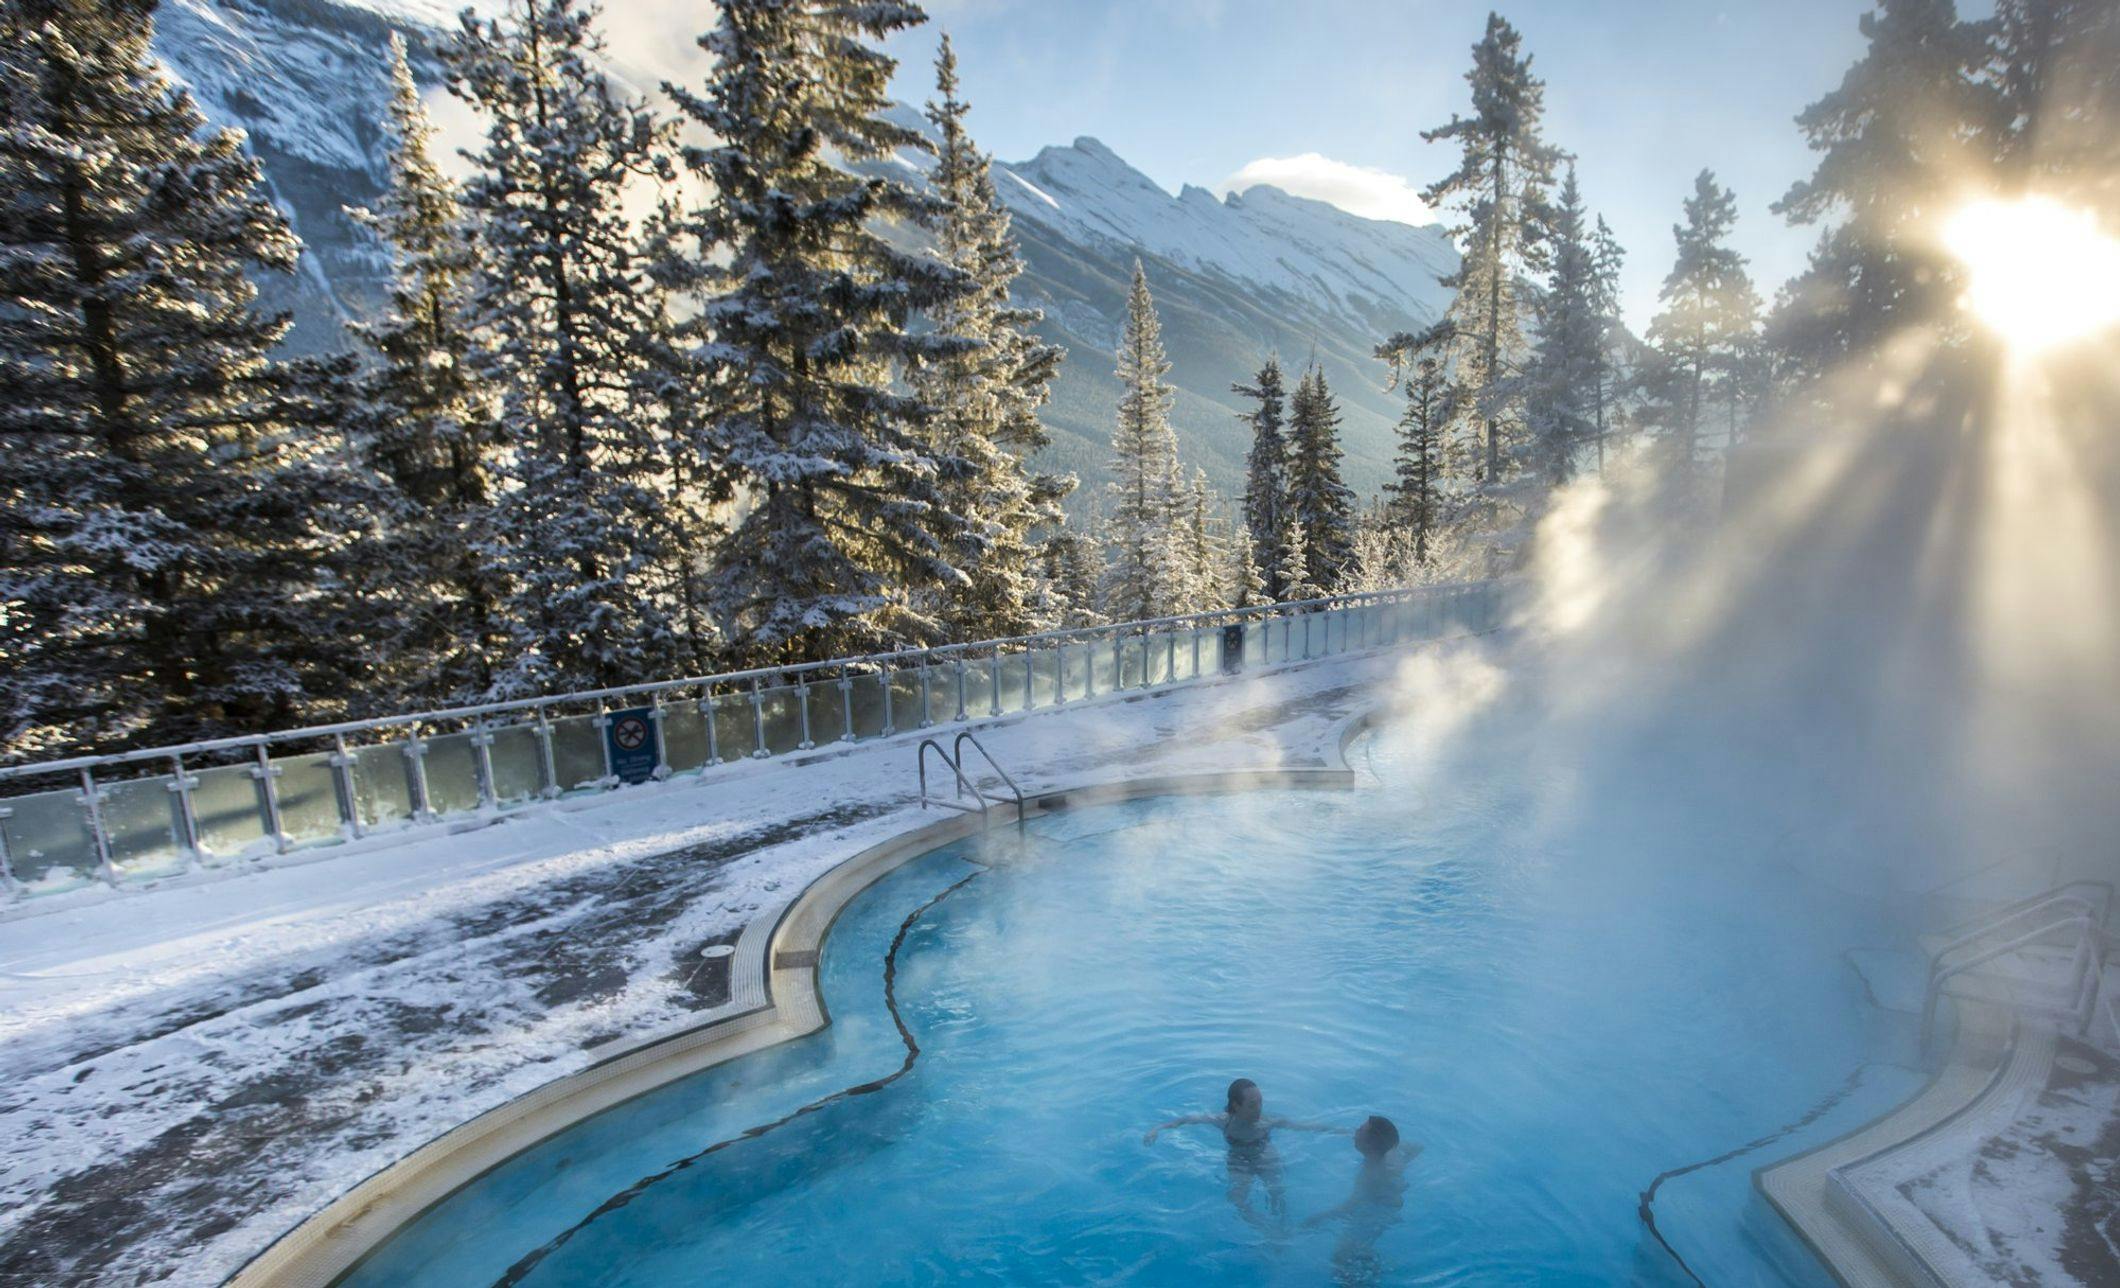 A couple soaking in an outdoor hot spring pool surrounded by snowy mountains and trees